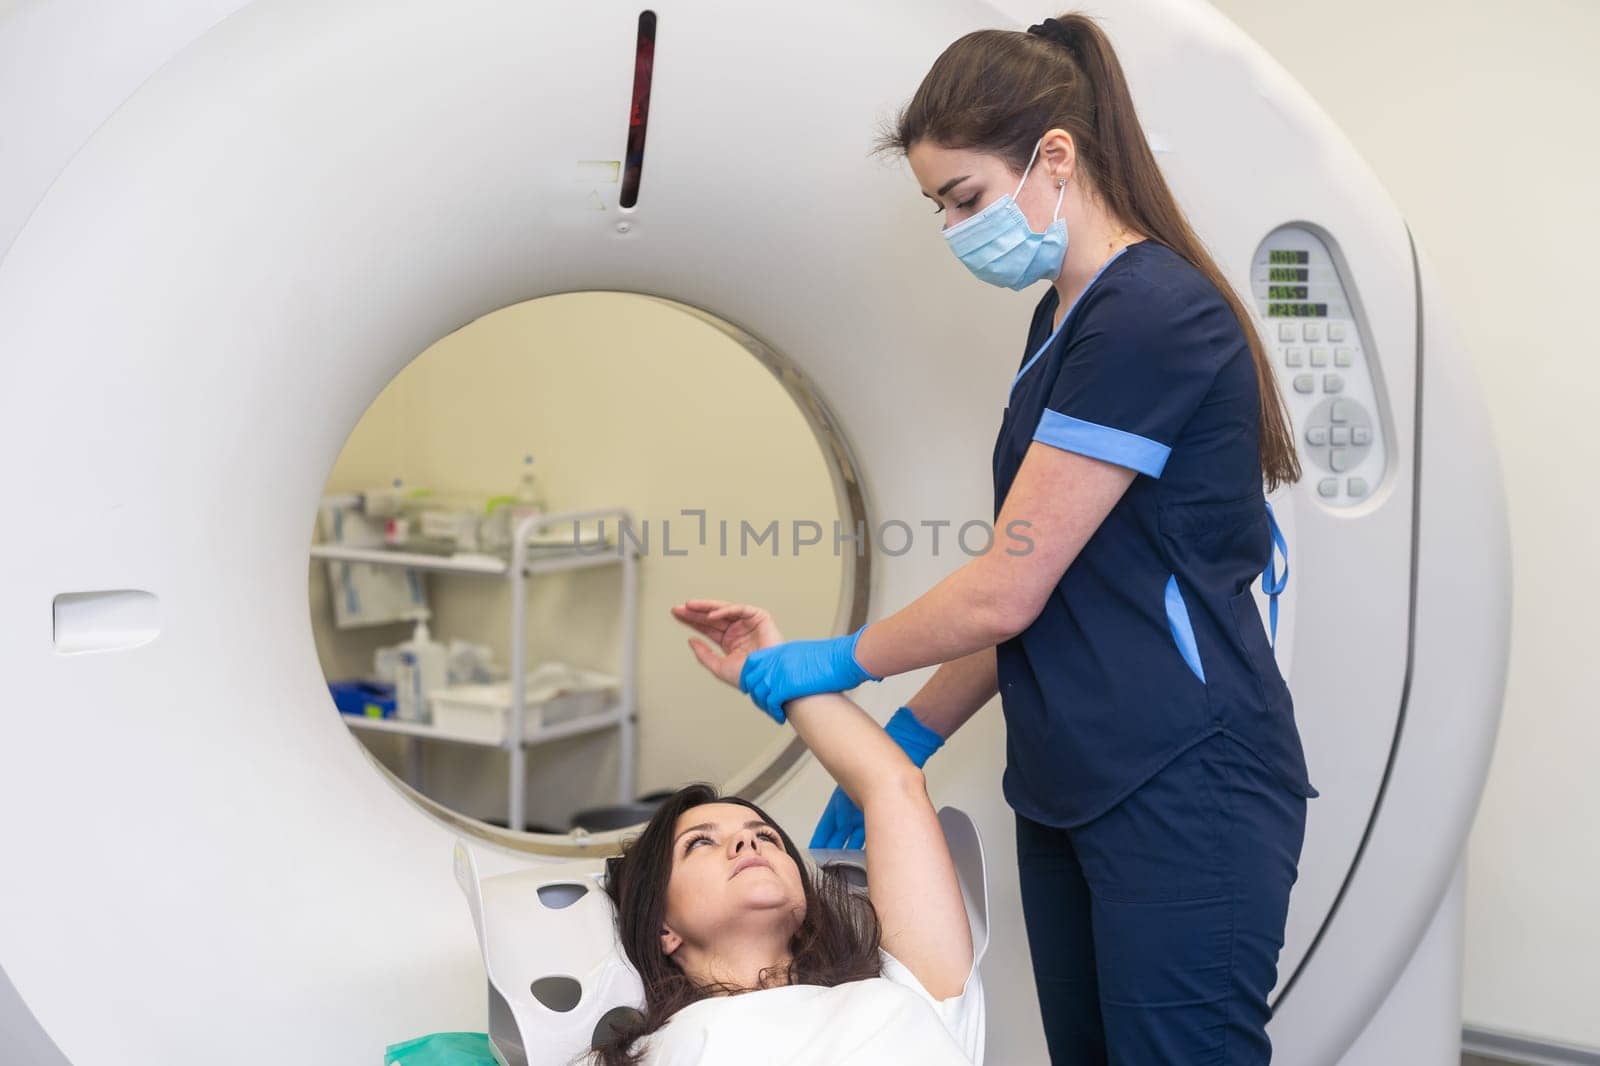 CT (Computed tomography) scanner in hospital laboratory by Andelov13